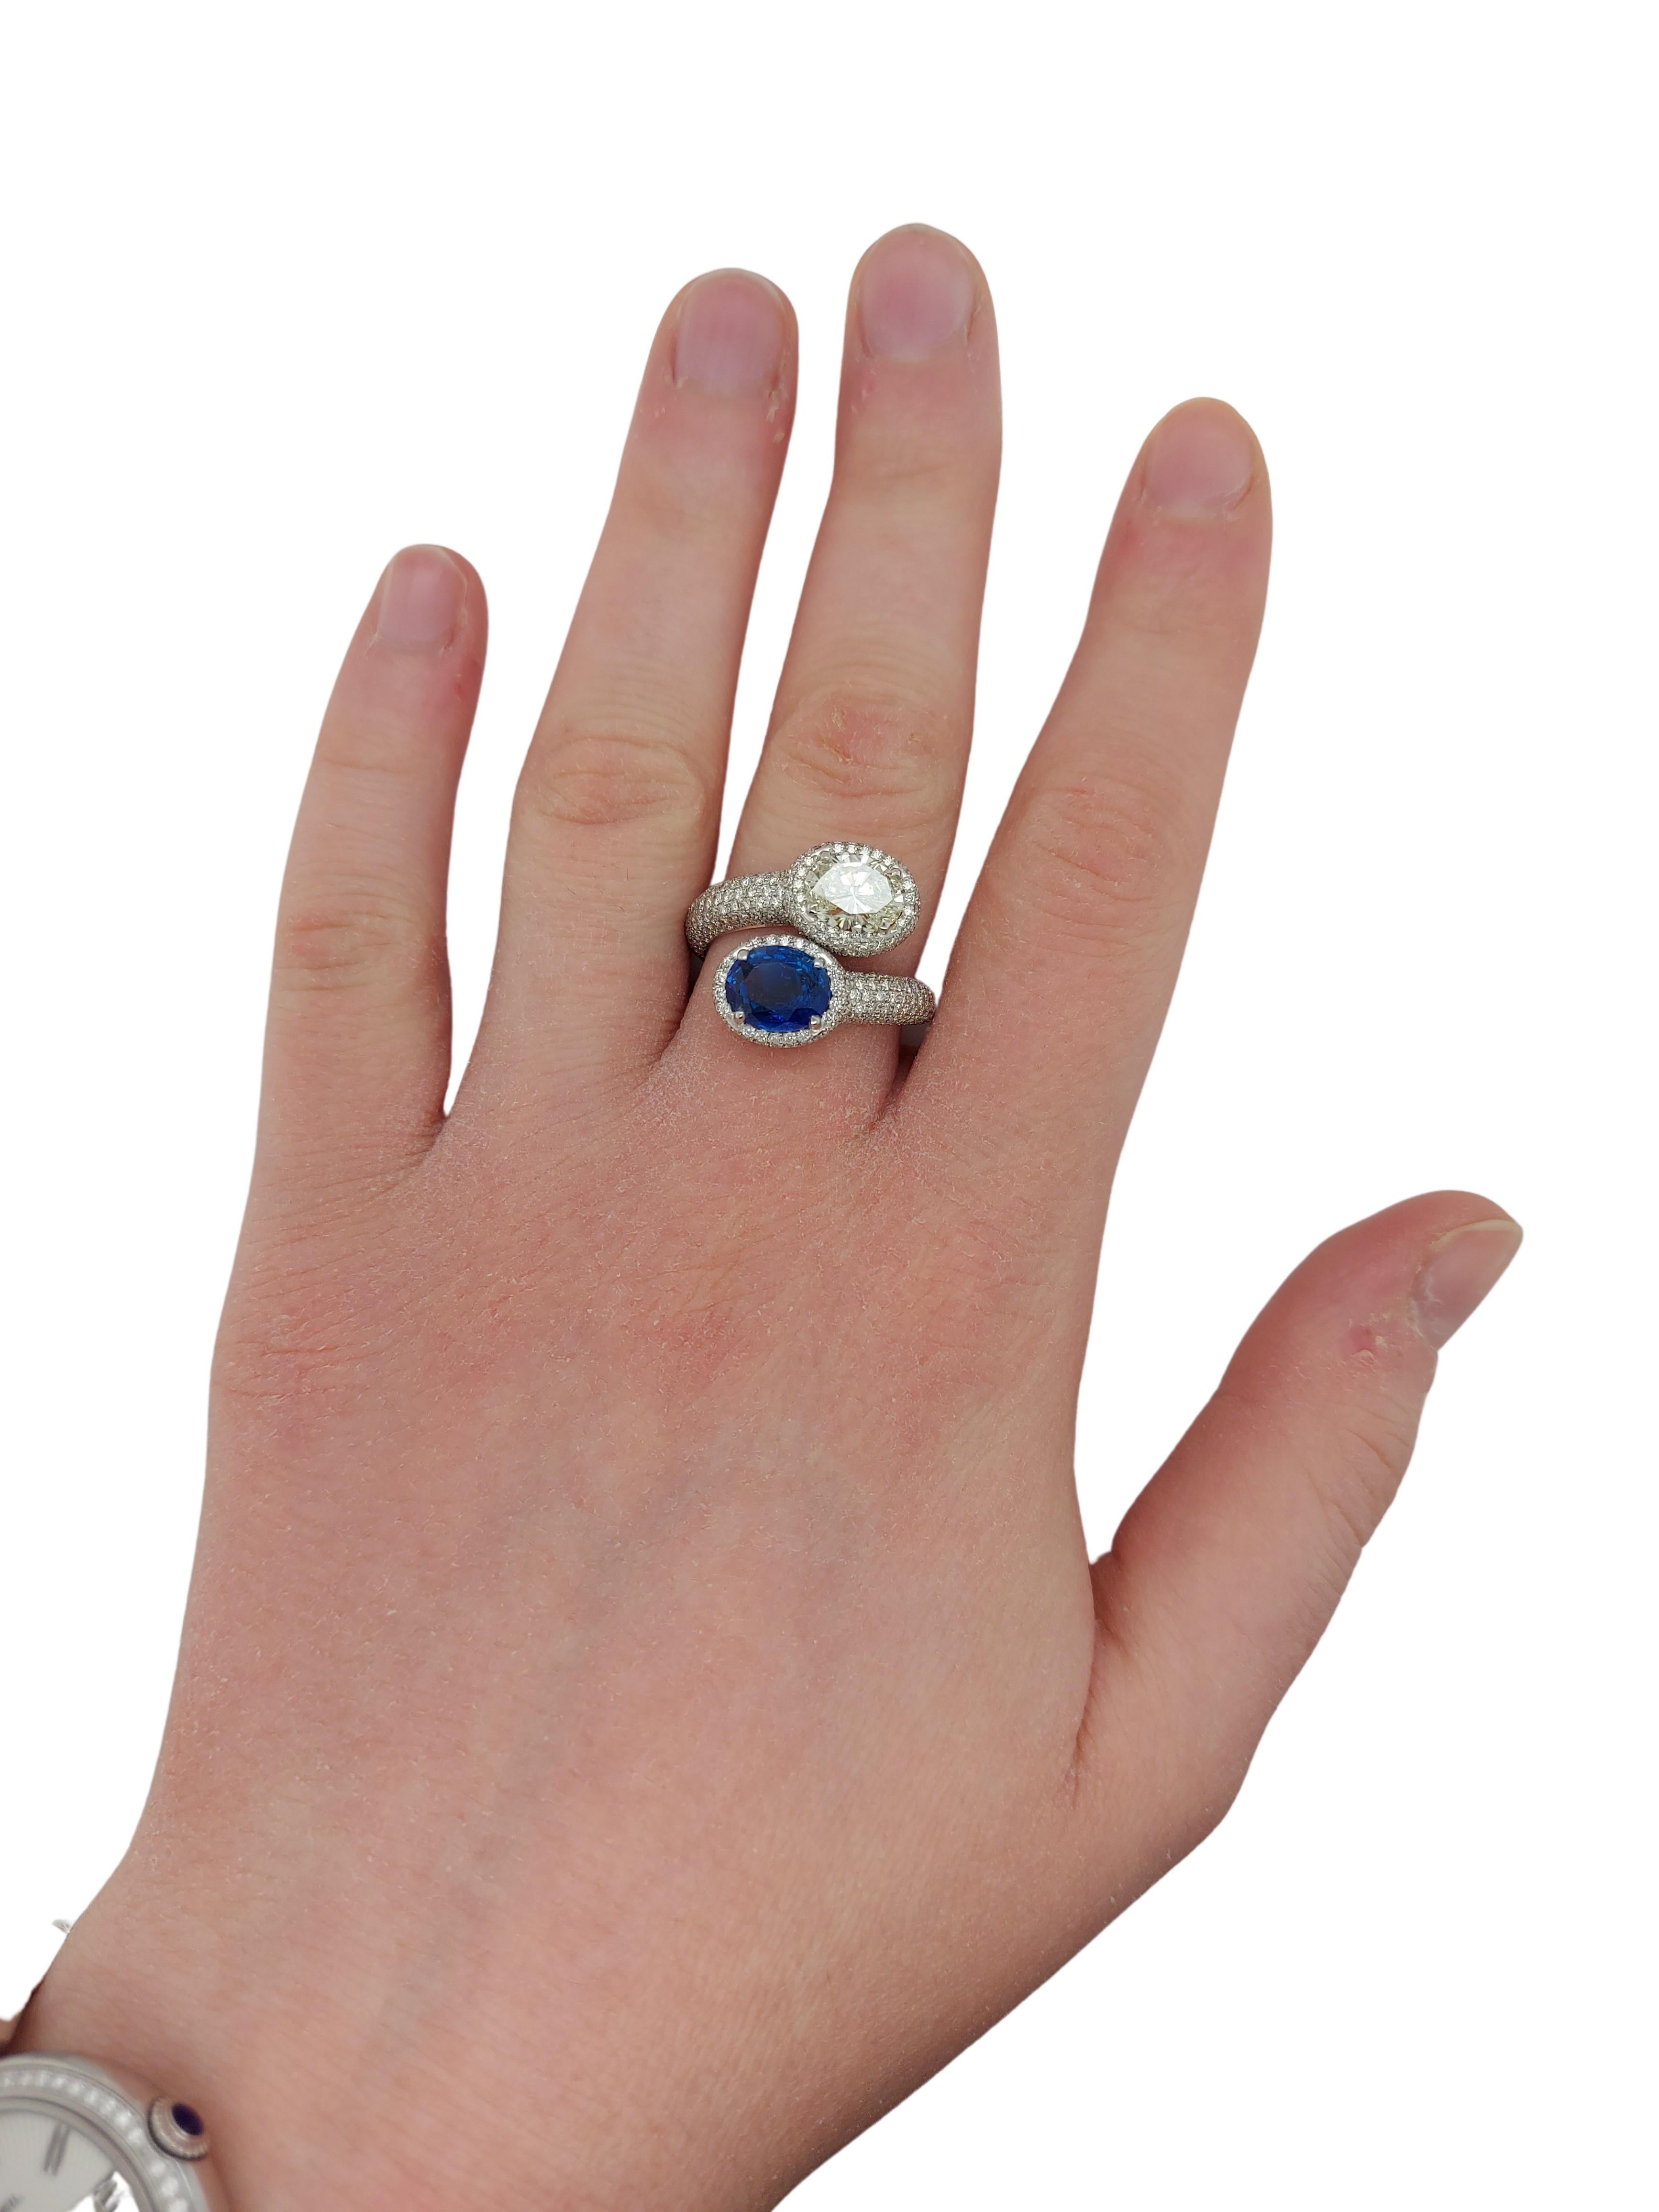 Stunning Toi et Moi 18kt White Gold Ring with a 2.63 Carat Sapphire, 1.67 Carat  For Sale 9